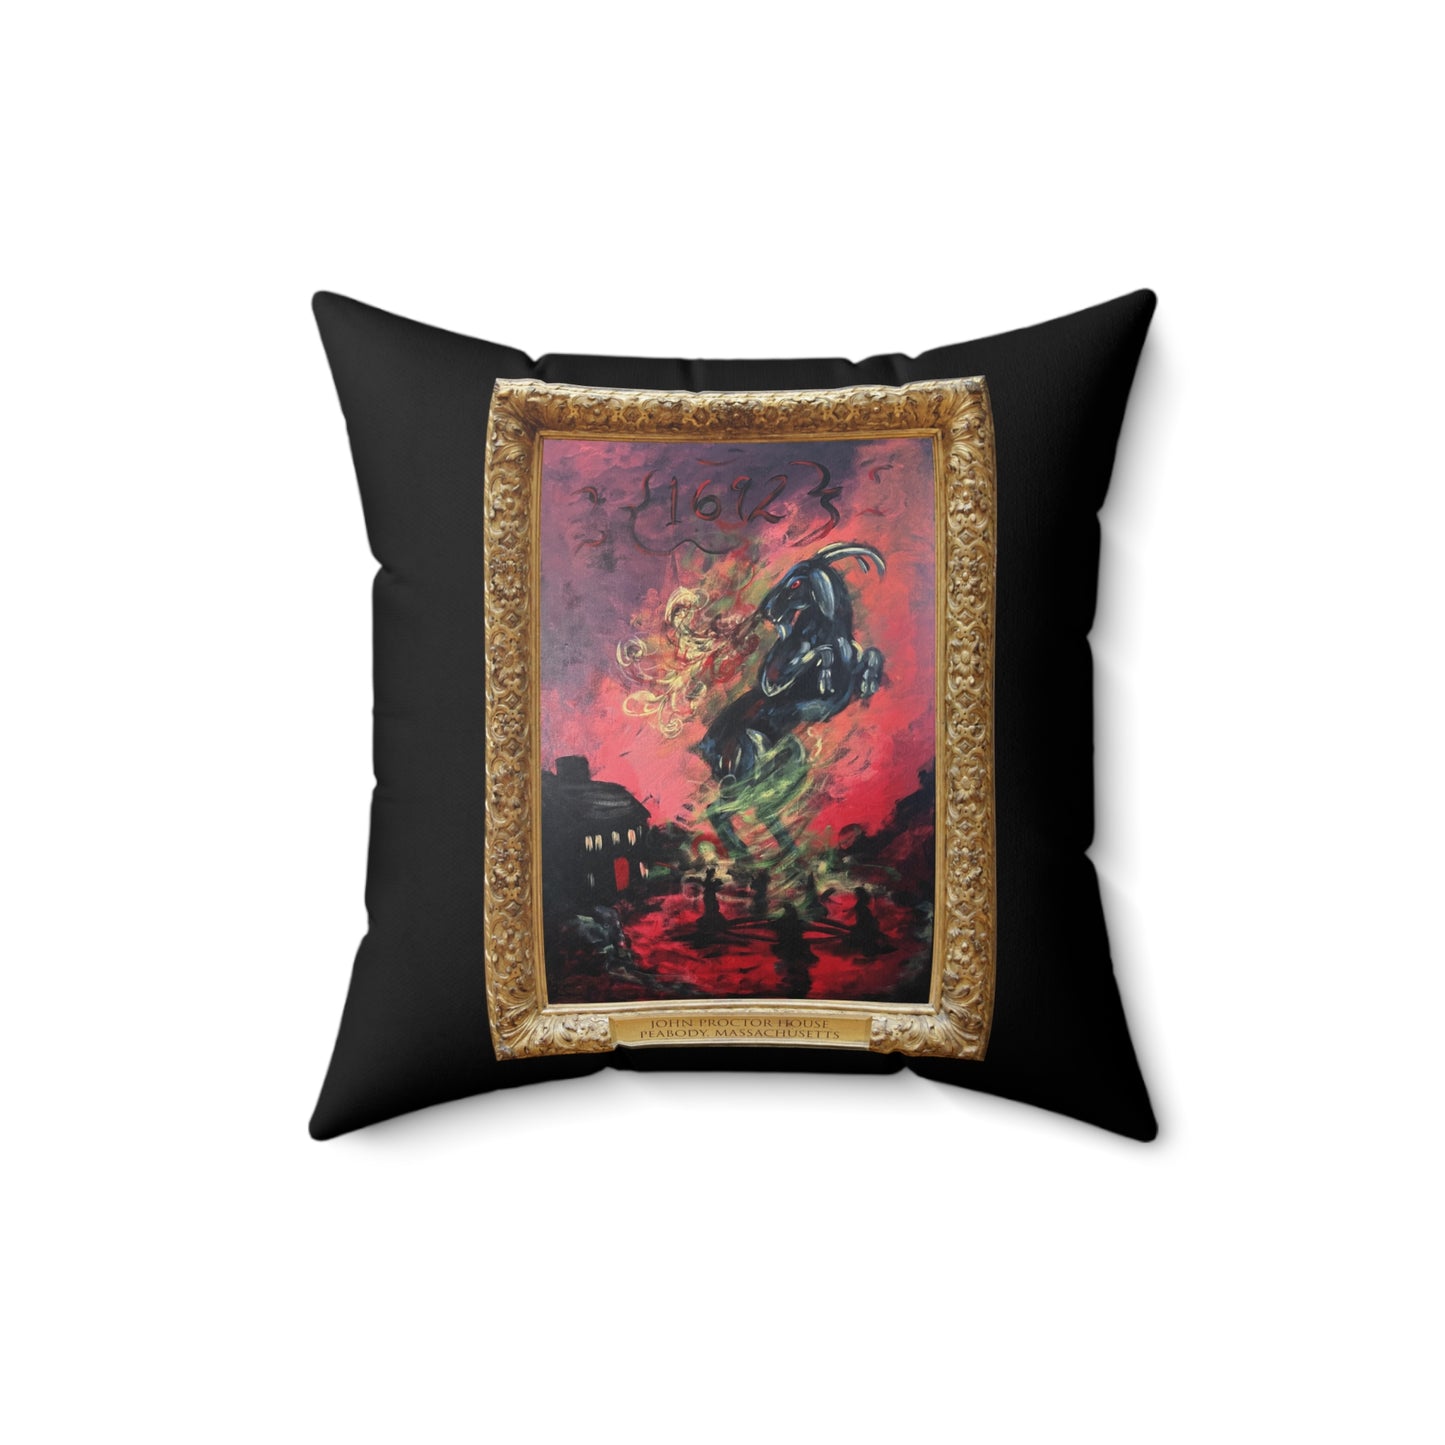 Scared & Alone Richard-Lael's "The Proctor House" Gallery Cloth Square Pillow